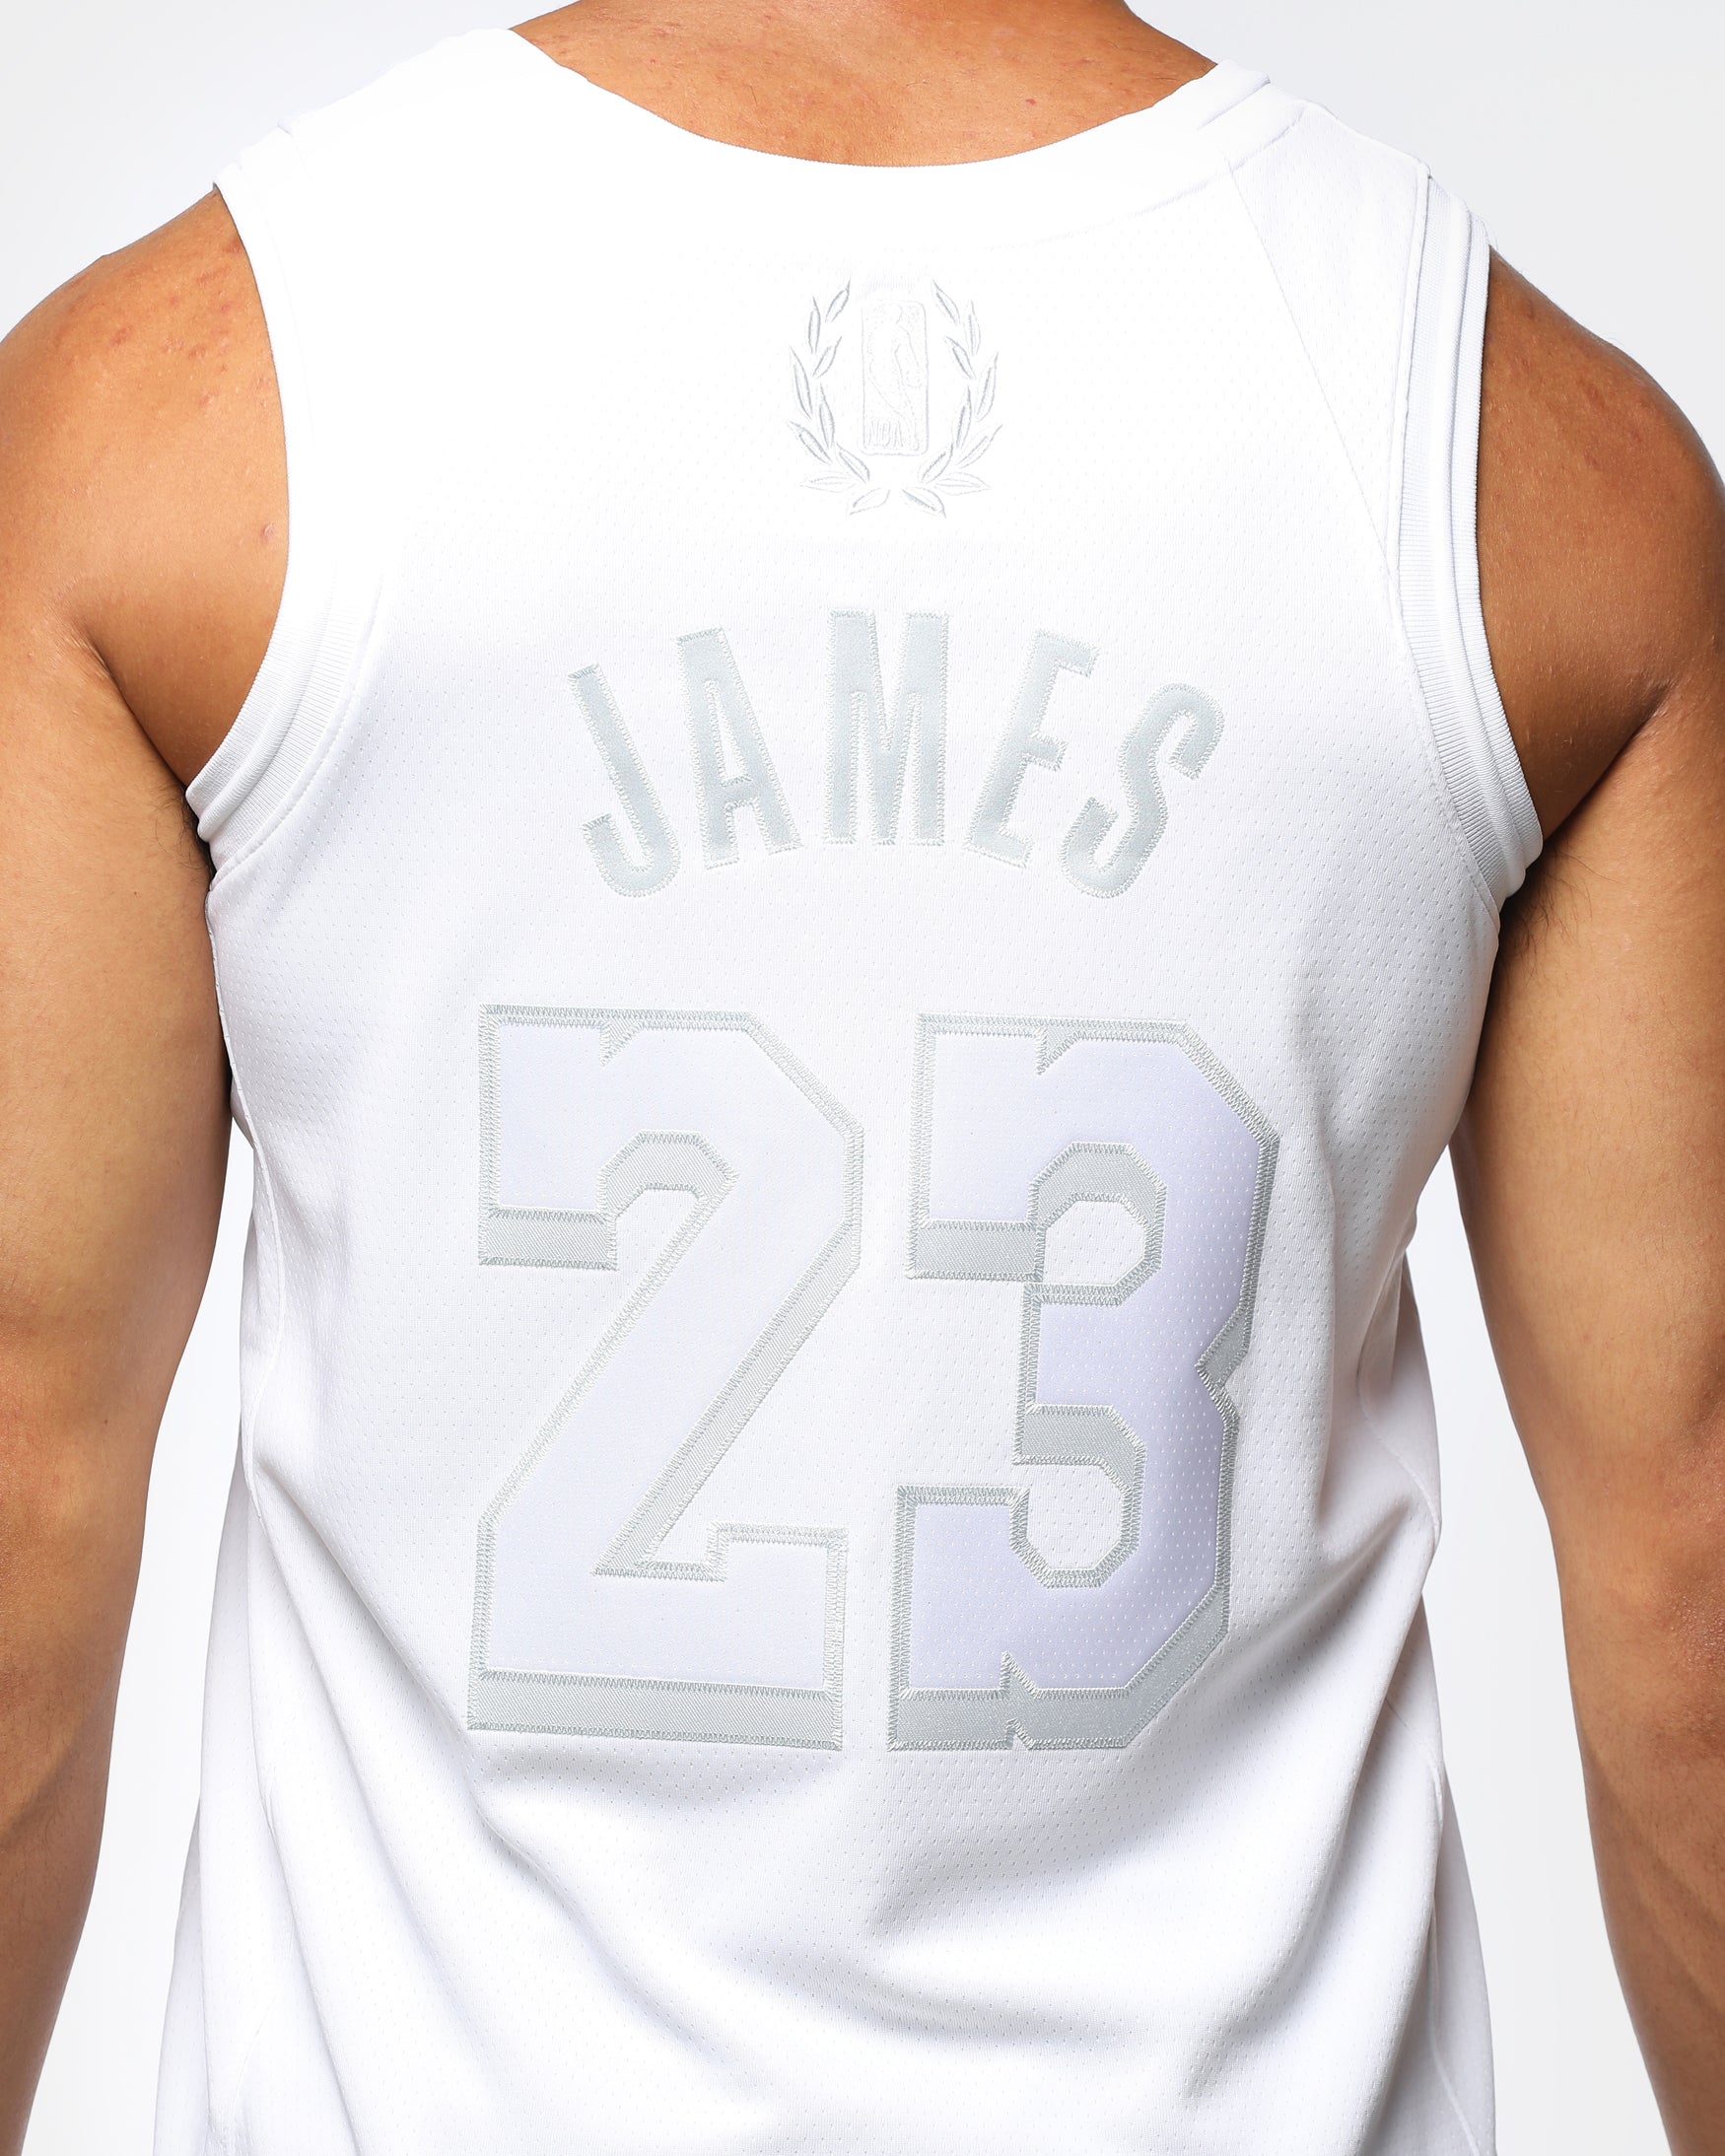 all white lakers jersey